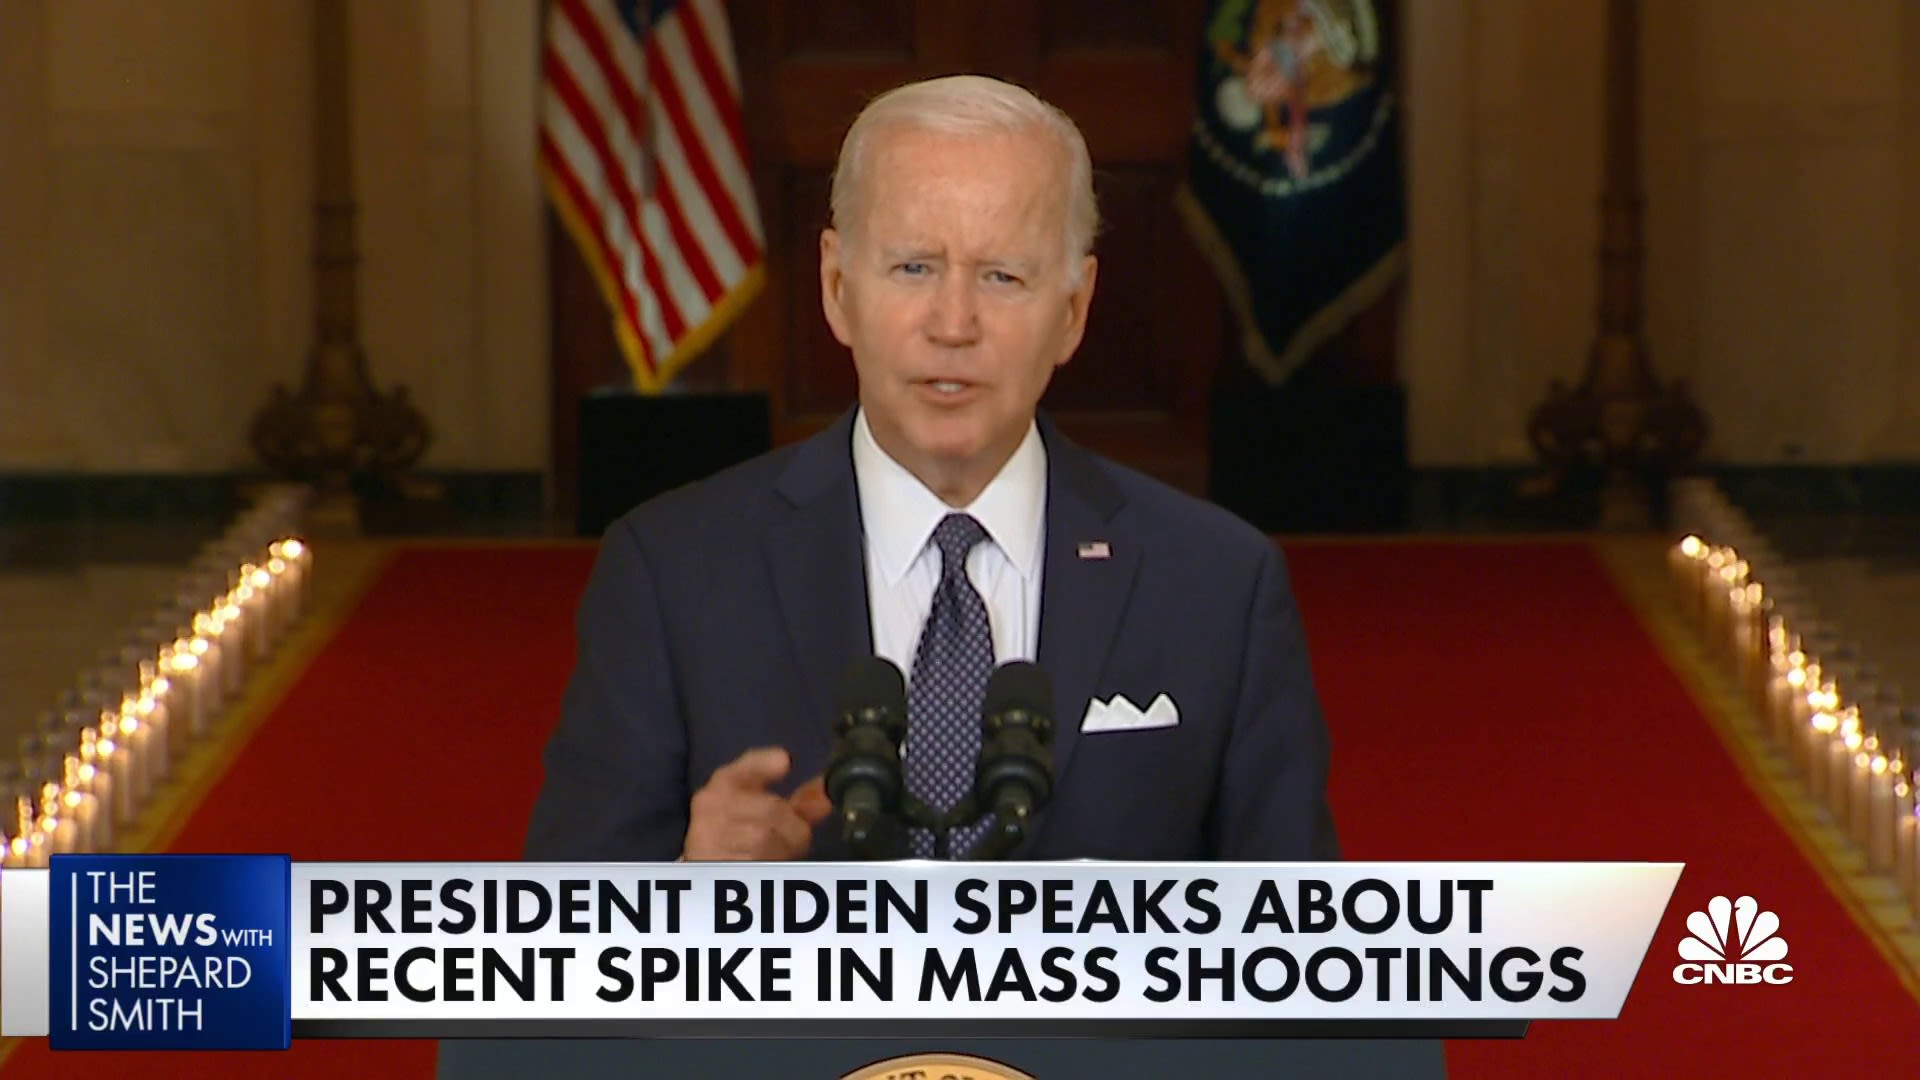 We need to ban assault weapons and high-capacity magazines, says Pres. Biden